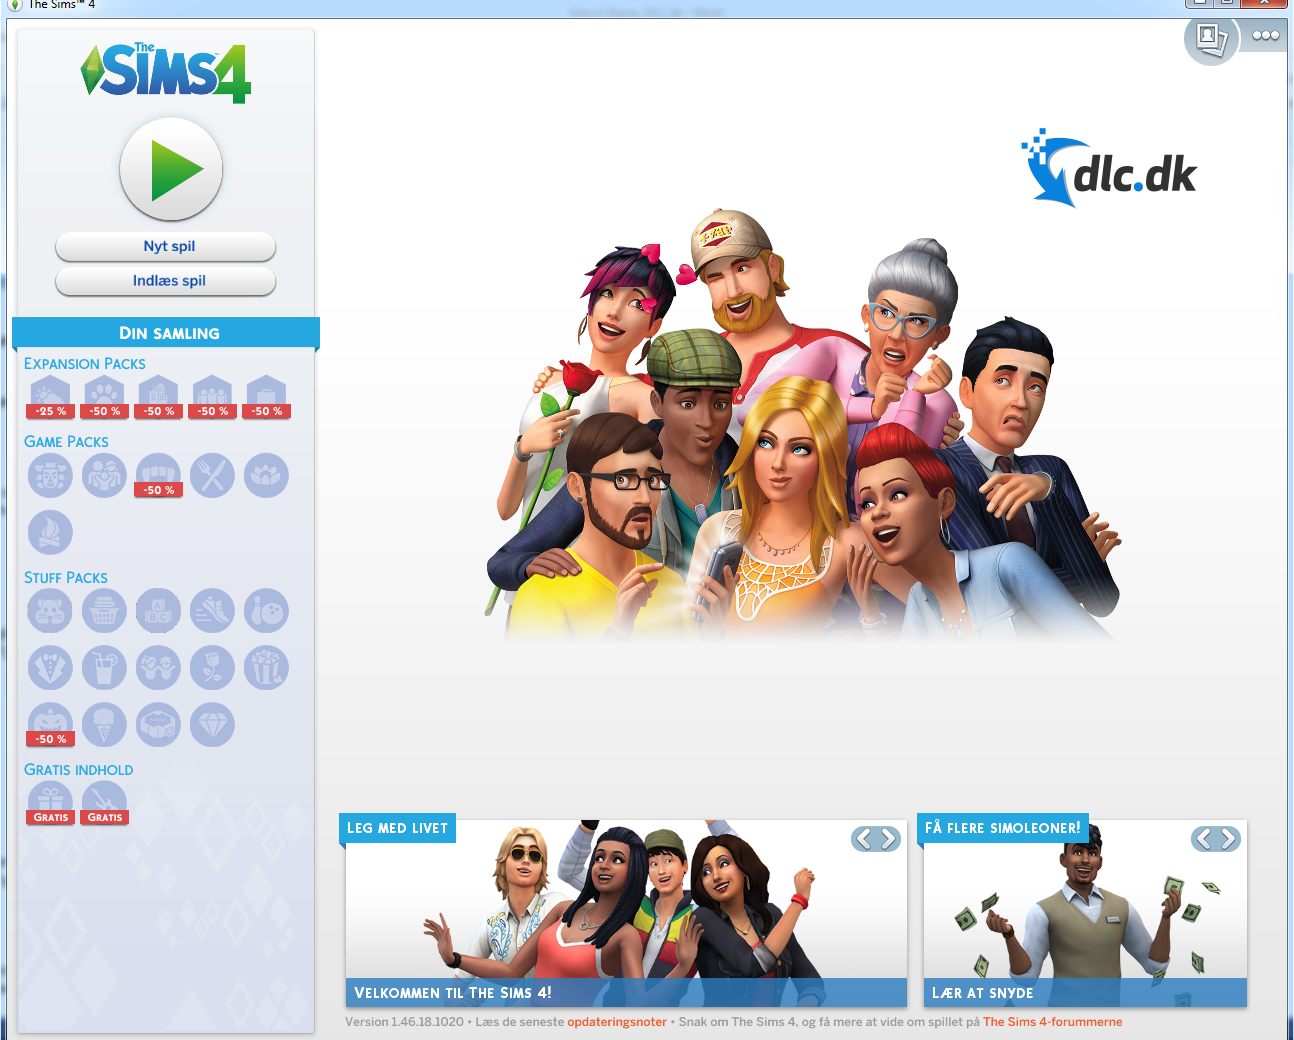 The sims 4 free trial